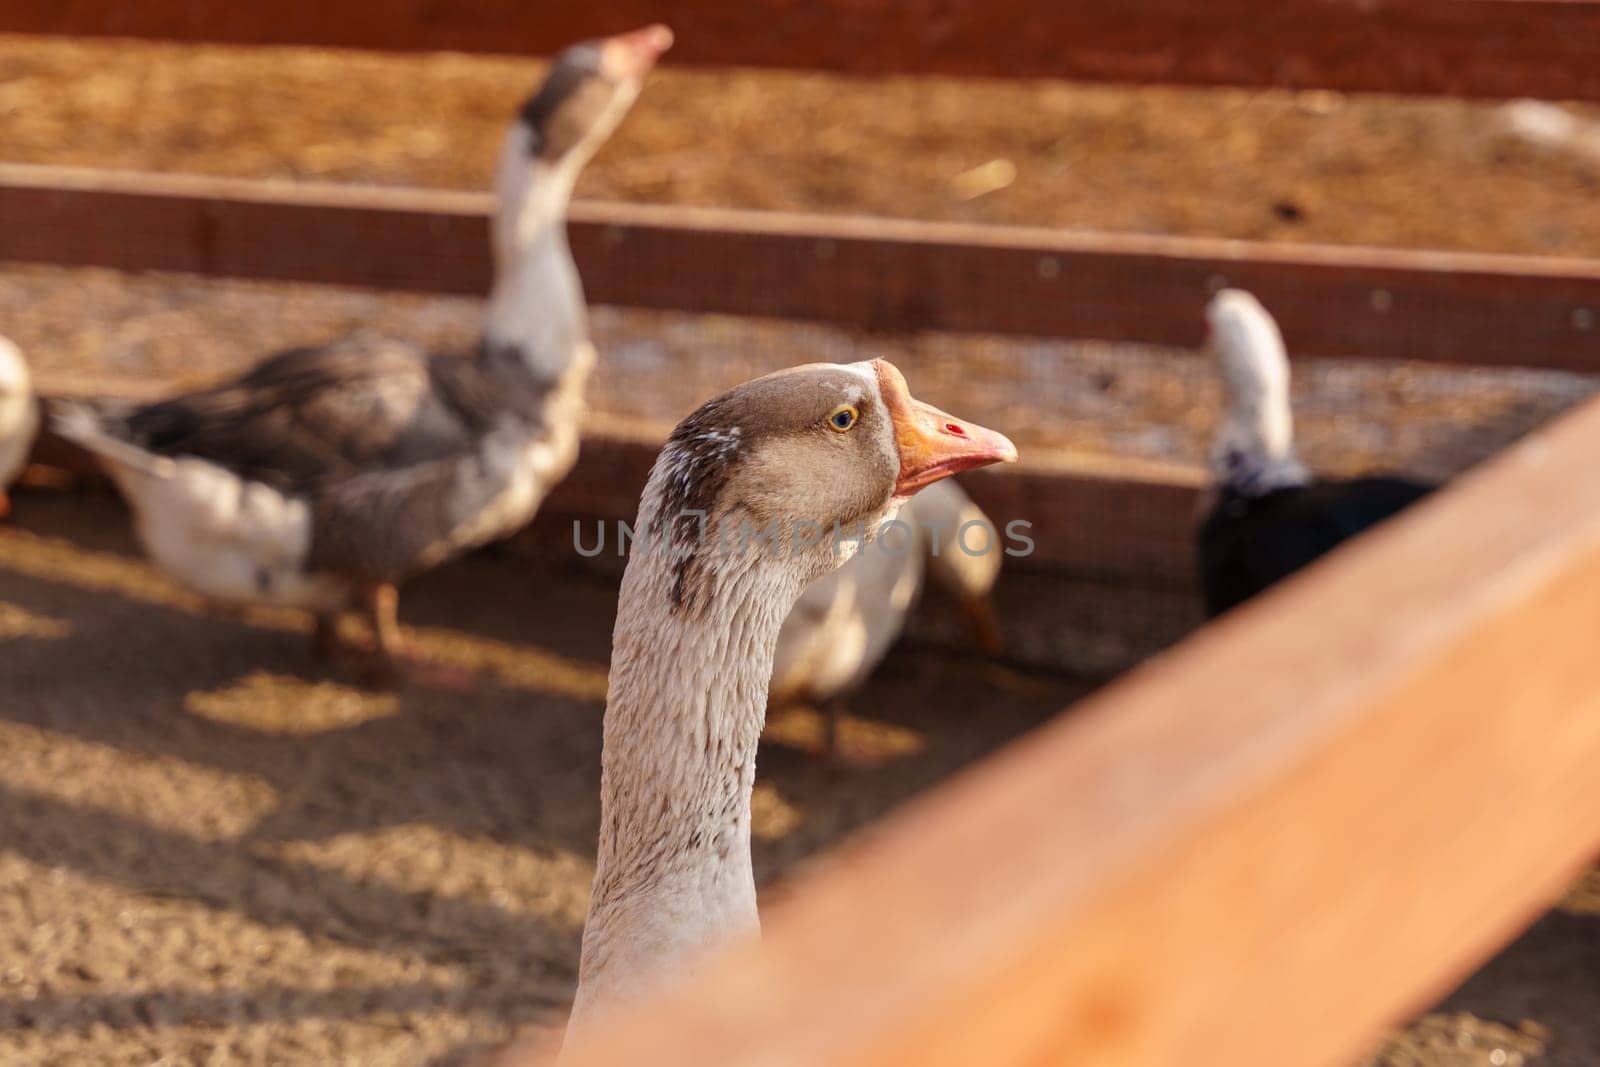 Geese group are peacefully coexisting within a fenced-in area on a farm